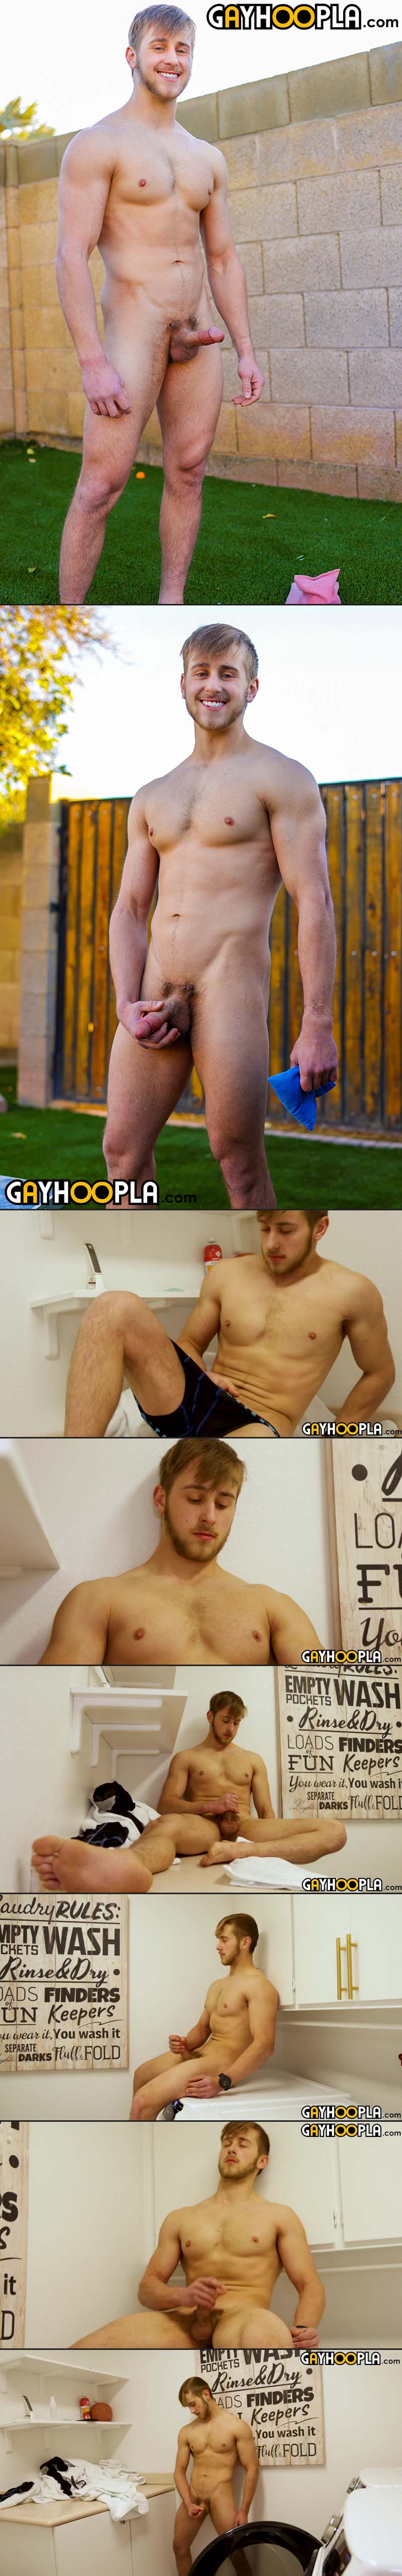 Brock Fisher Sneaks Away To Rub One Out! at GayHoopla